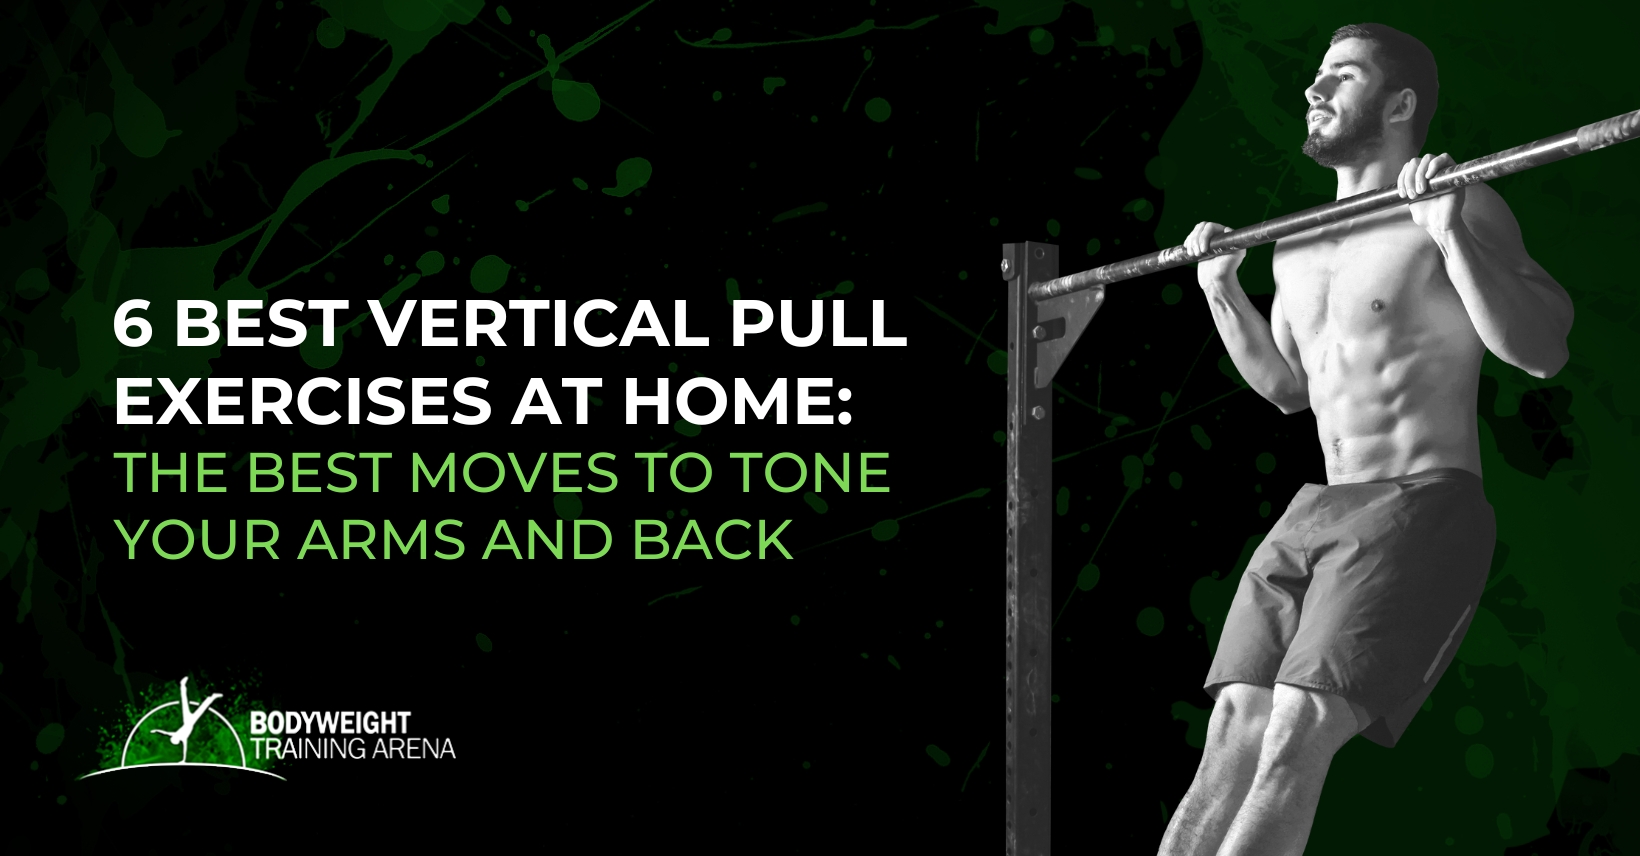 6 Best Vertical Pull Exercises at Home: The Best Moves to Tone Your Arms and Back